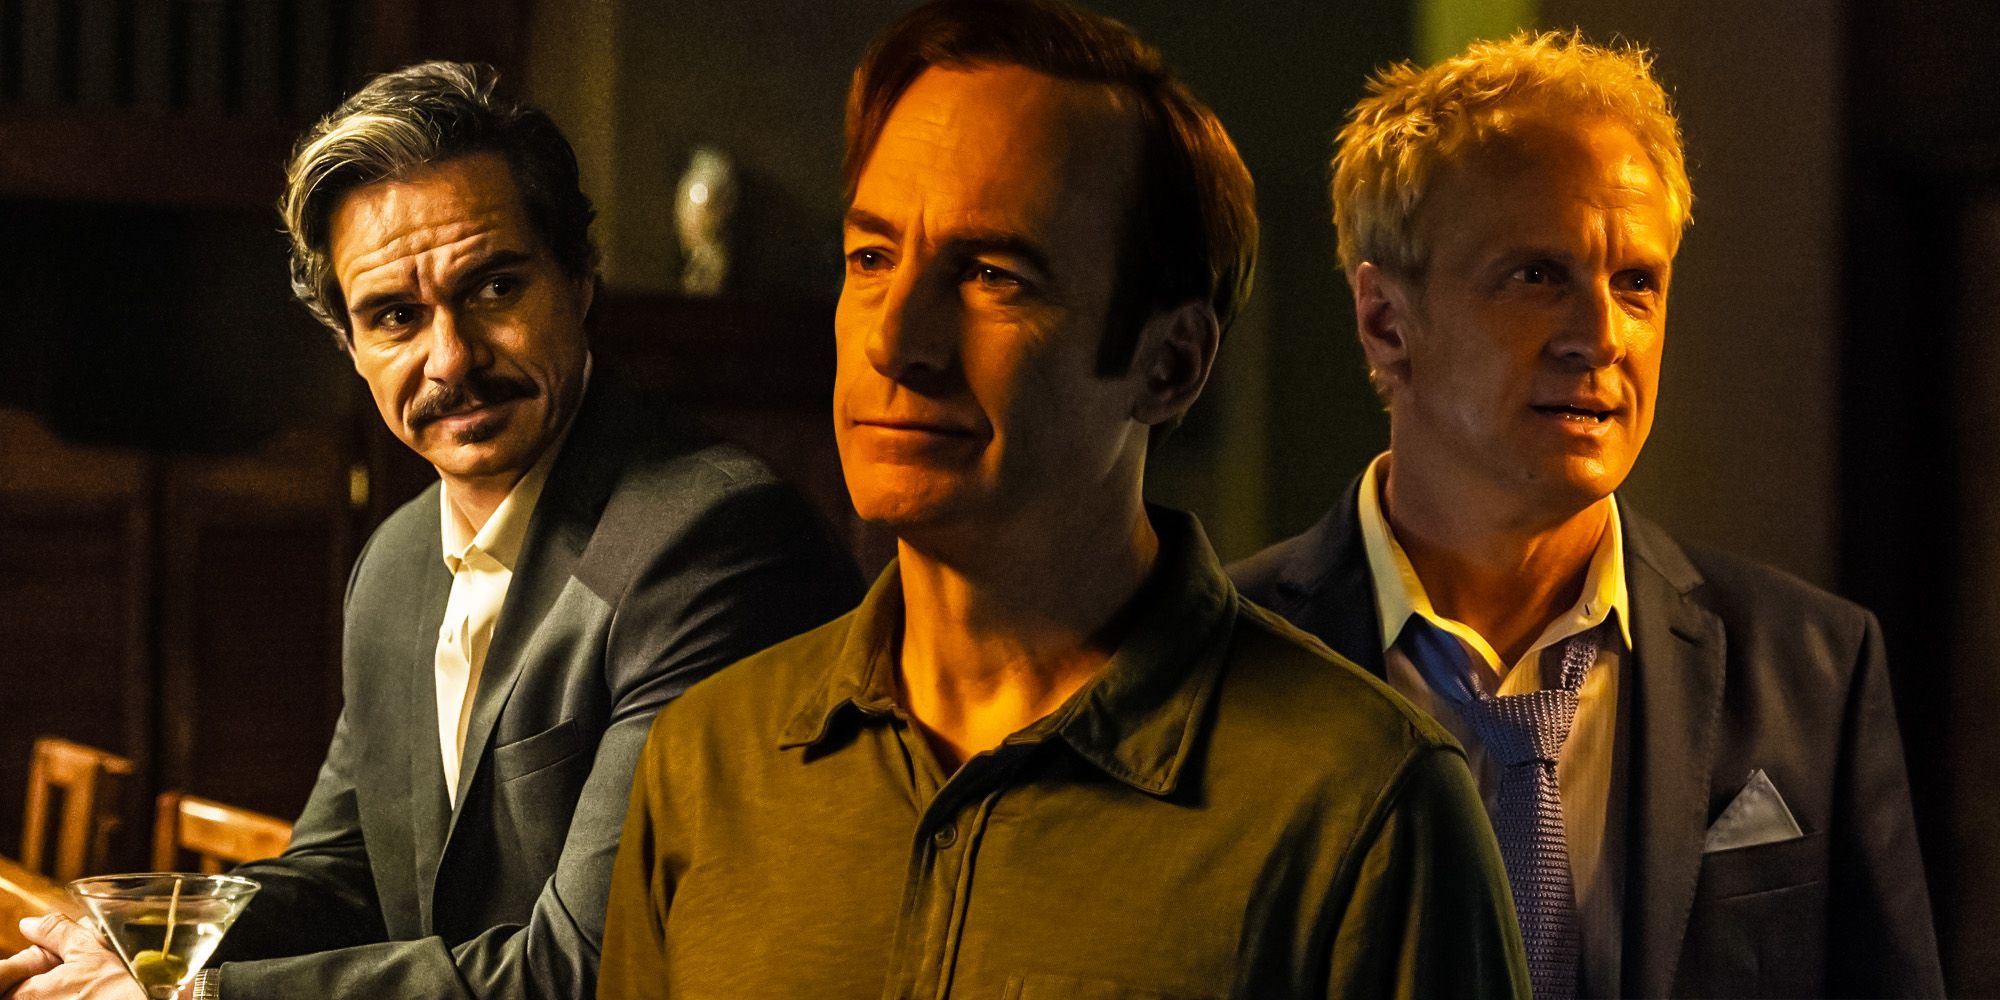 How will Better call saul will end